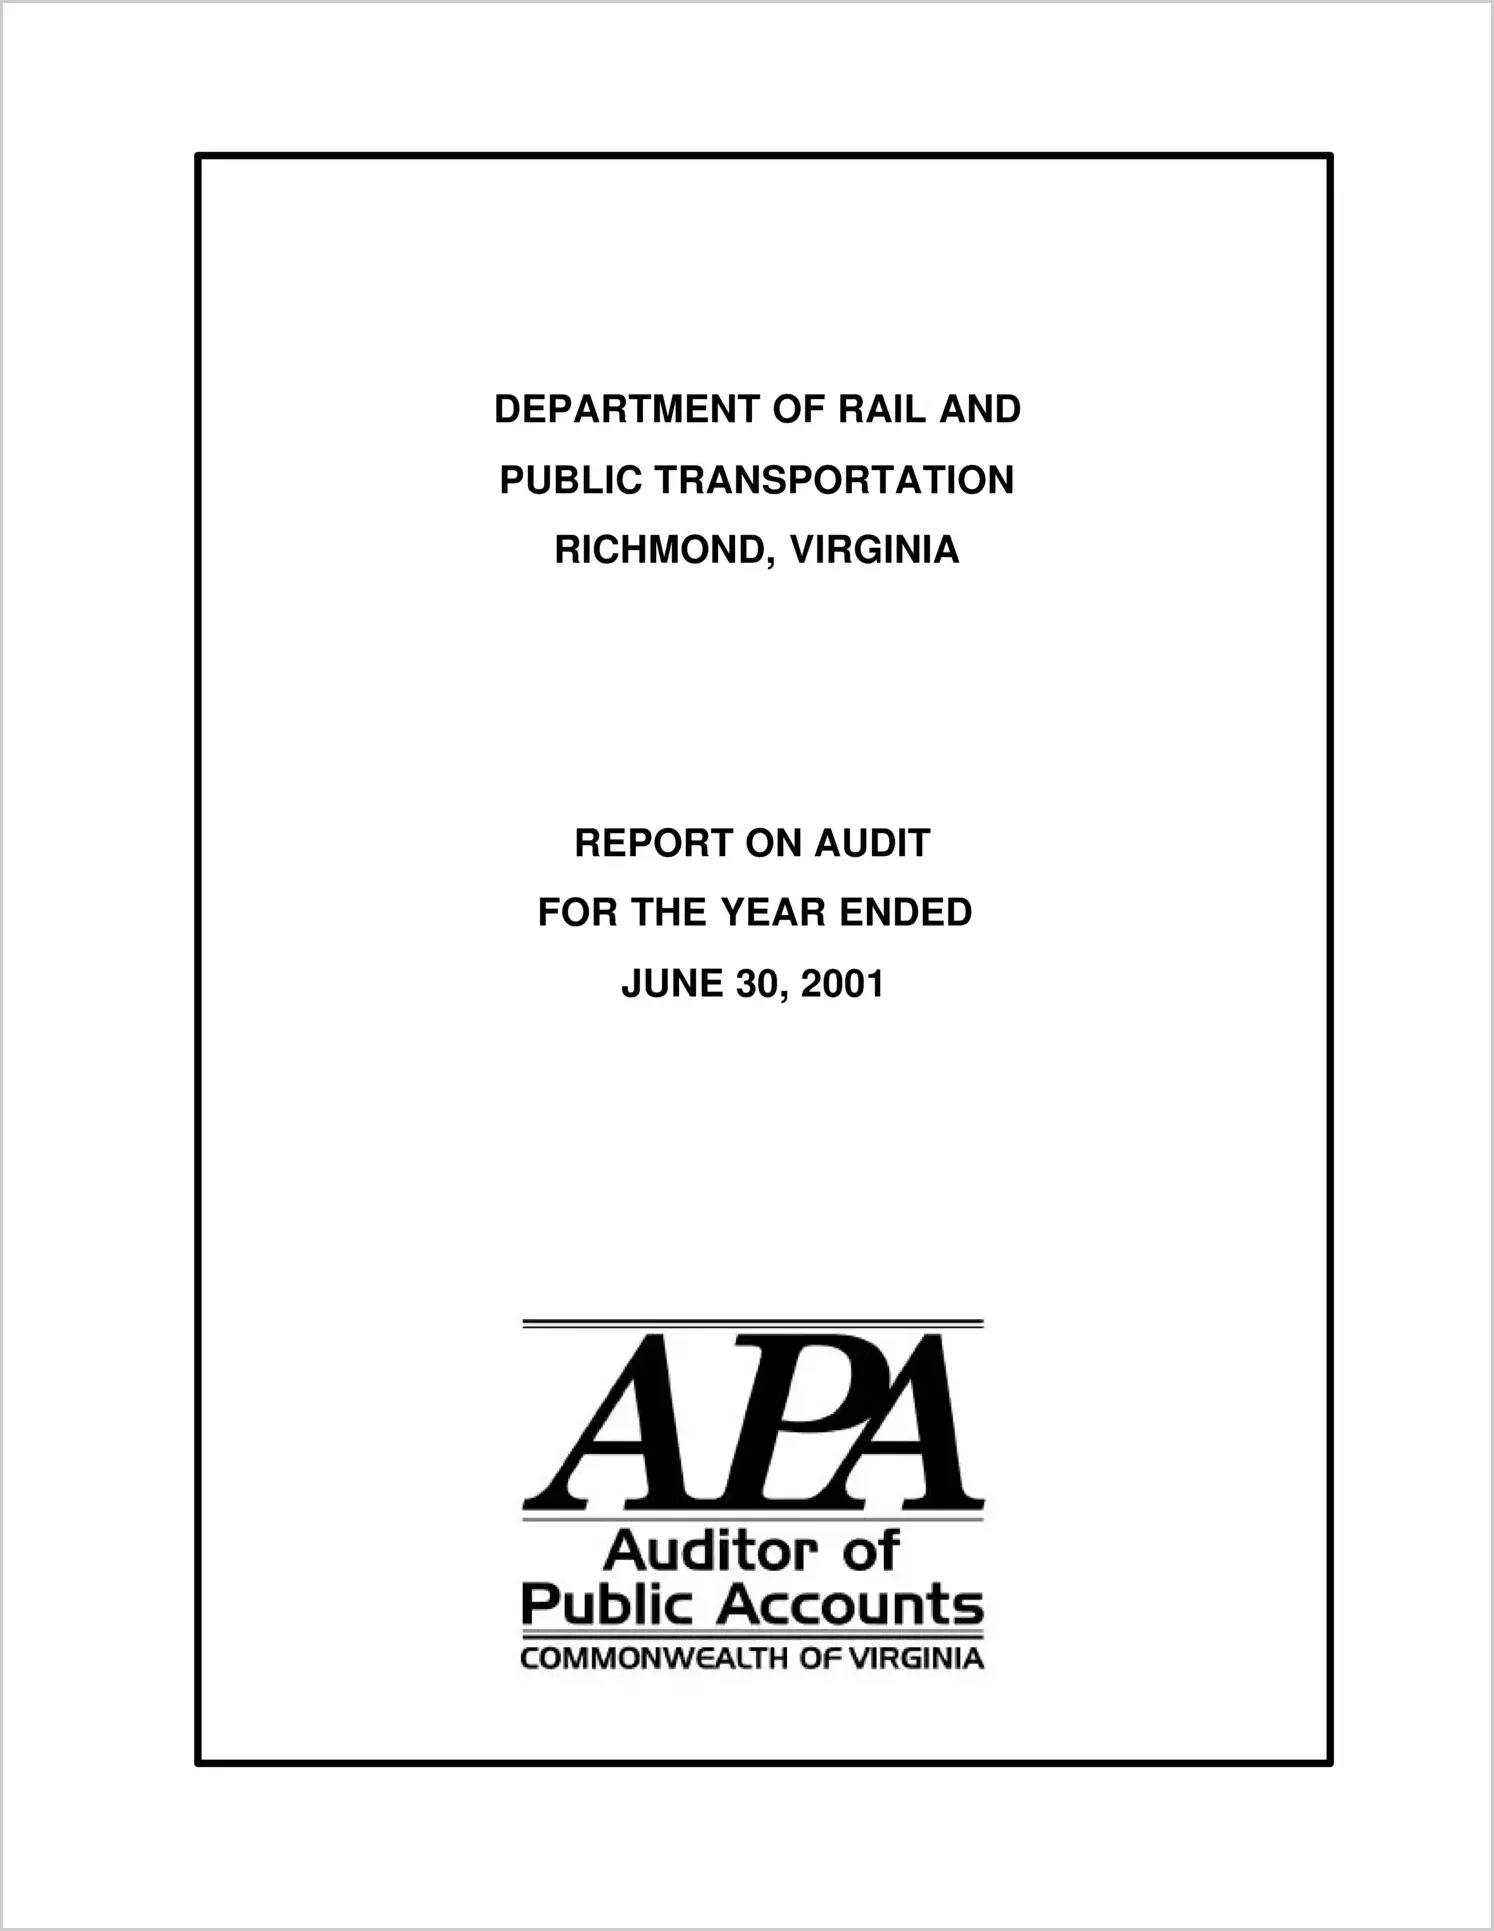 Department of Rail and Public Transportation for the year ended June 30, 2001